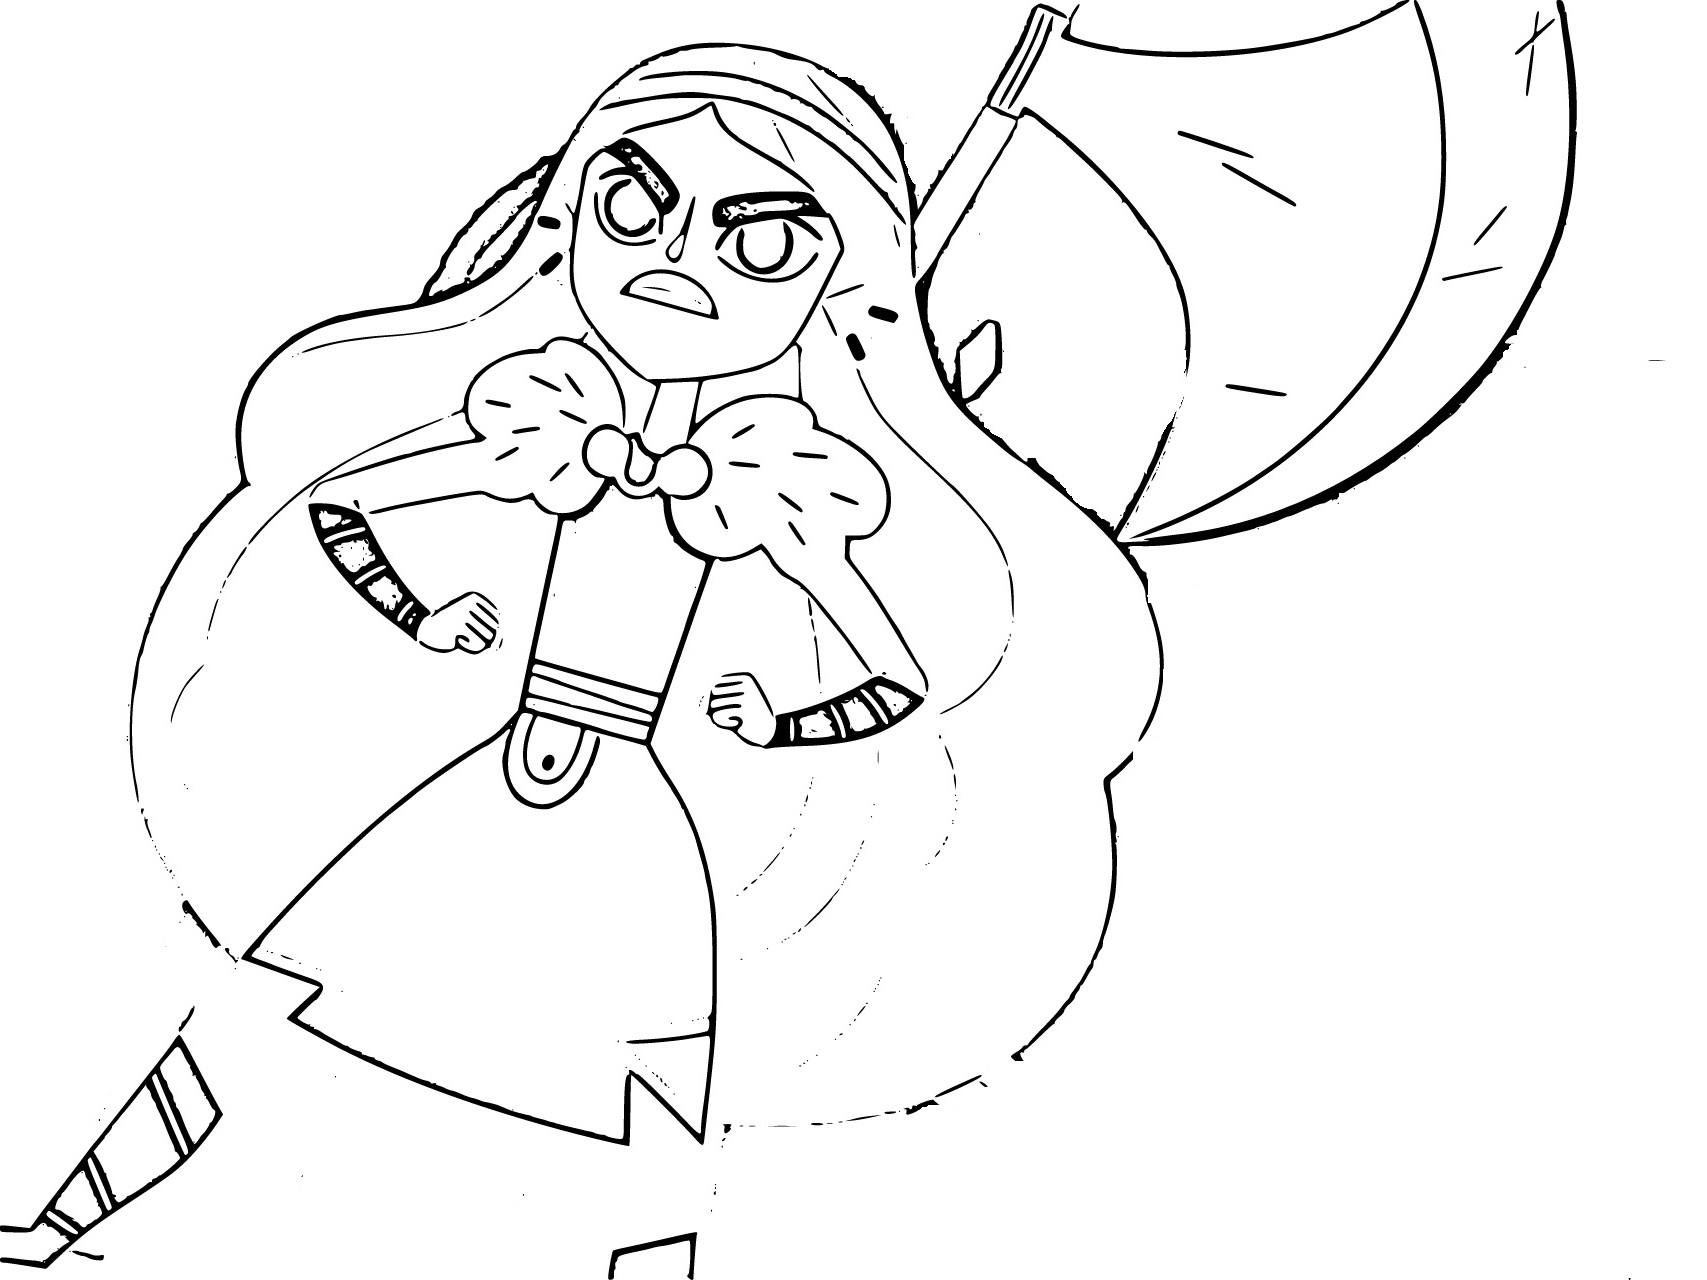 Printable Angry Ylva from Vikingskool Coloring Page for kids.